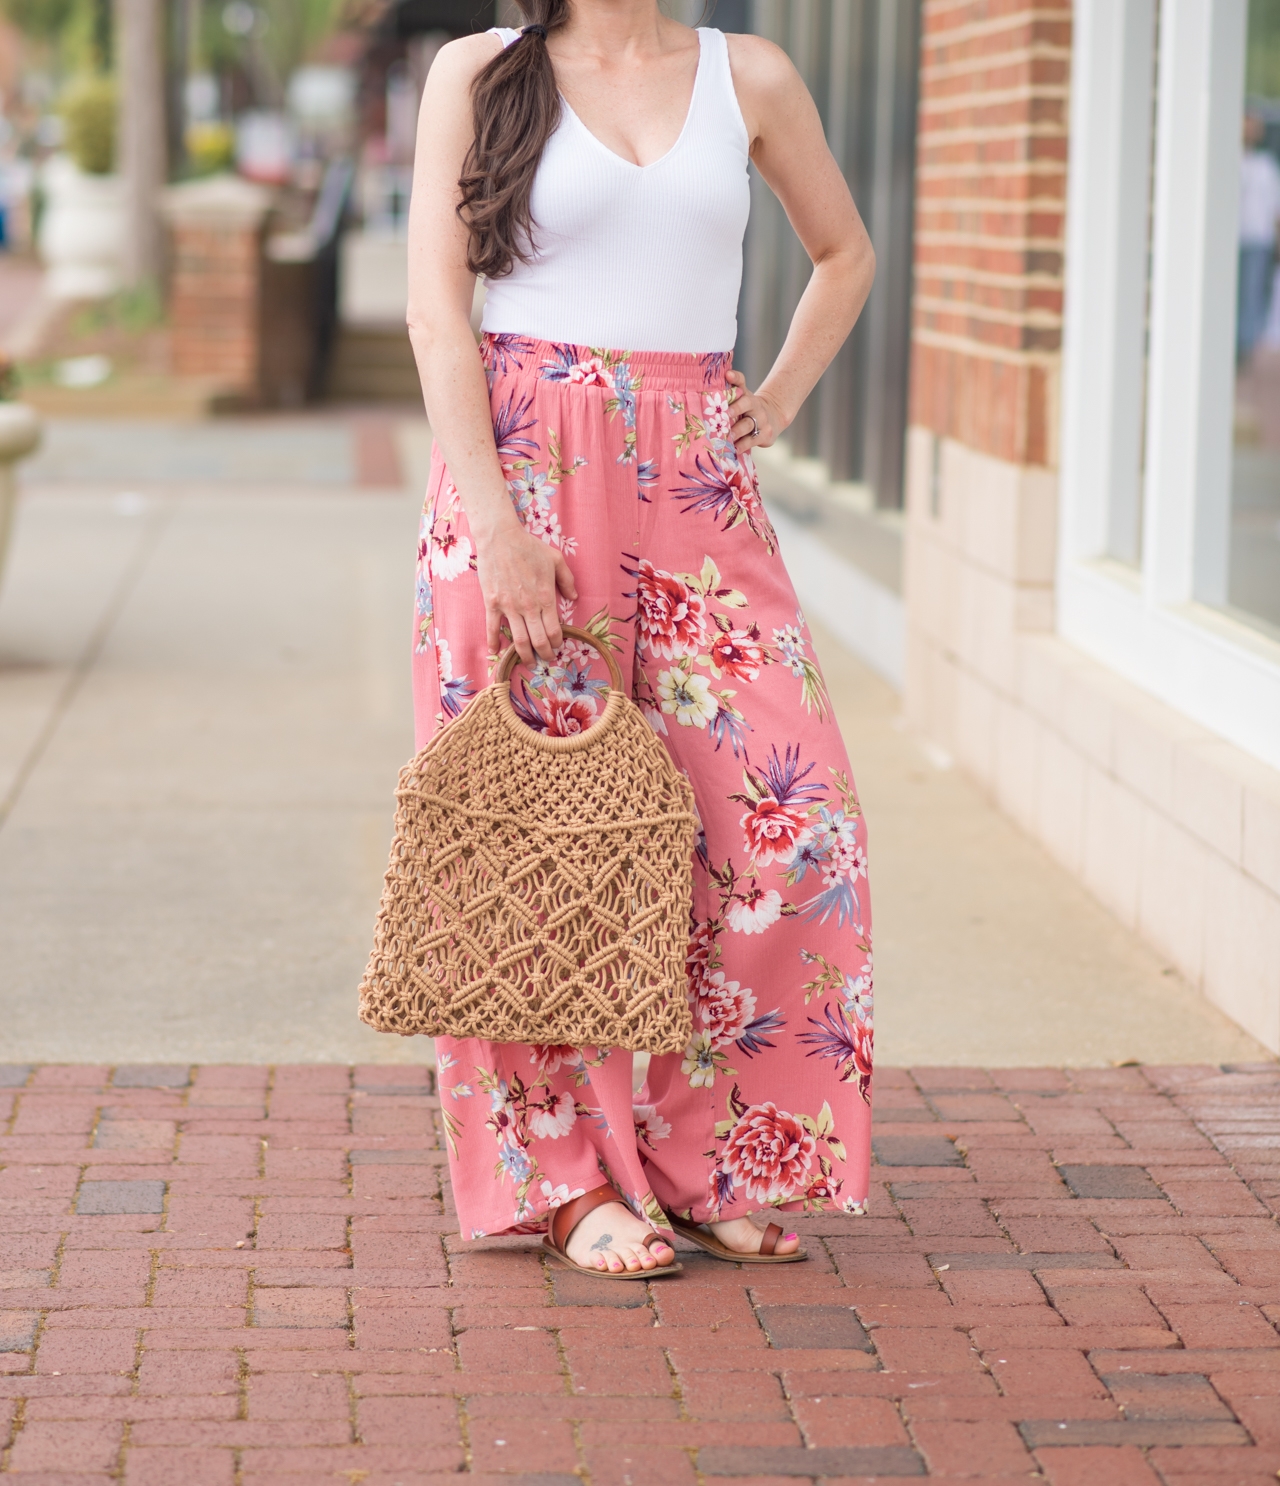 Pink Floral Palazzo Pants, palazzo pants, outfit of the day, travel blogger, style blogger, fashion blogger, atlanta blogger, live style travel blog, Erica Valentin, forever 21, crochet bag, boho bag, casual outfits, summer outfit ideas, spring outfit ideas, boho styles